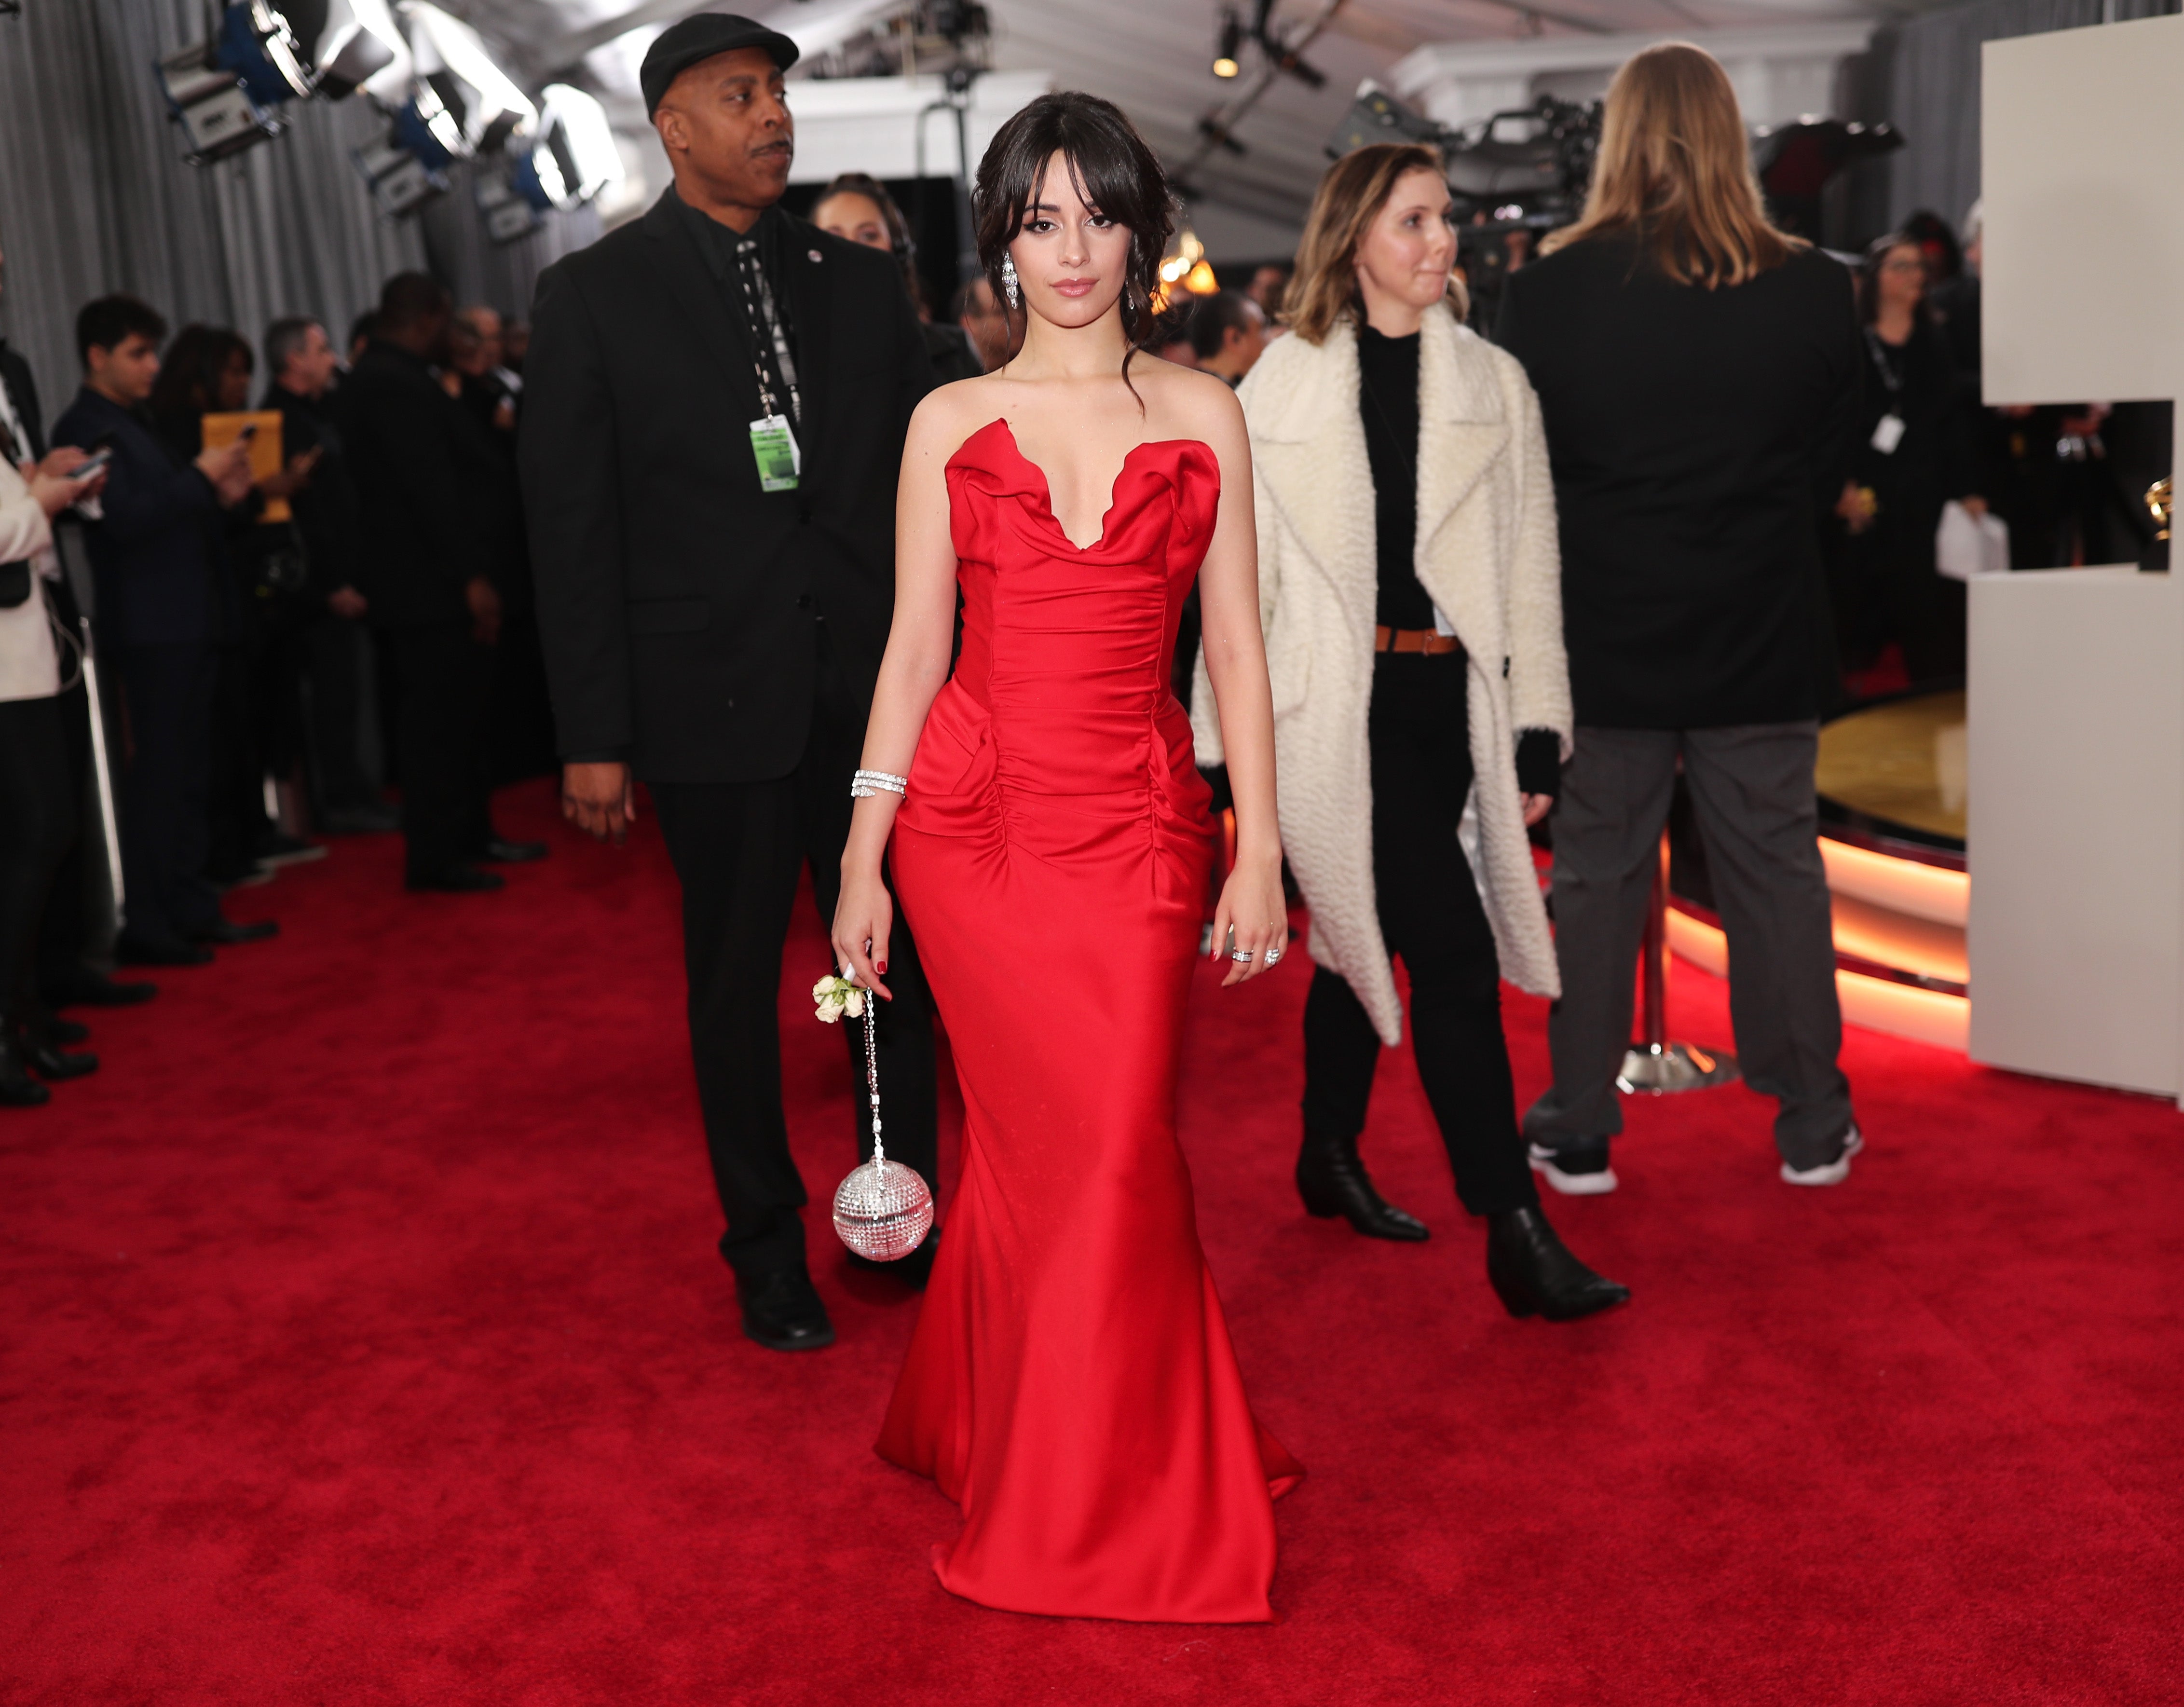 Grammy Awards 2018: Camila Cabello Delivers Old Hollywood Glamour